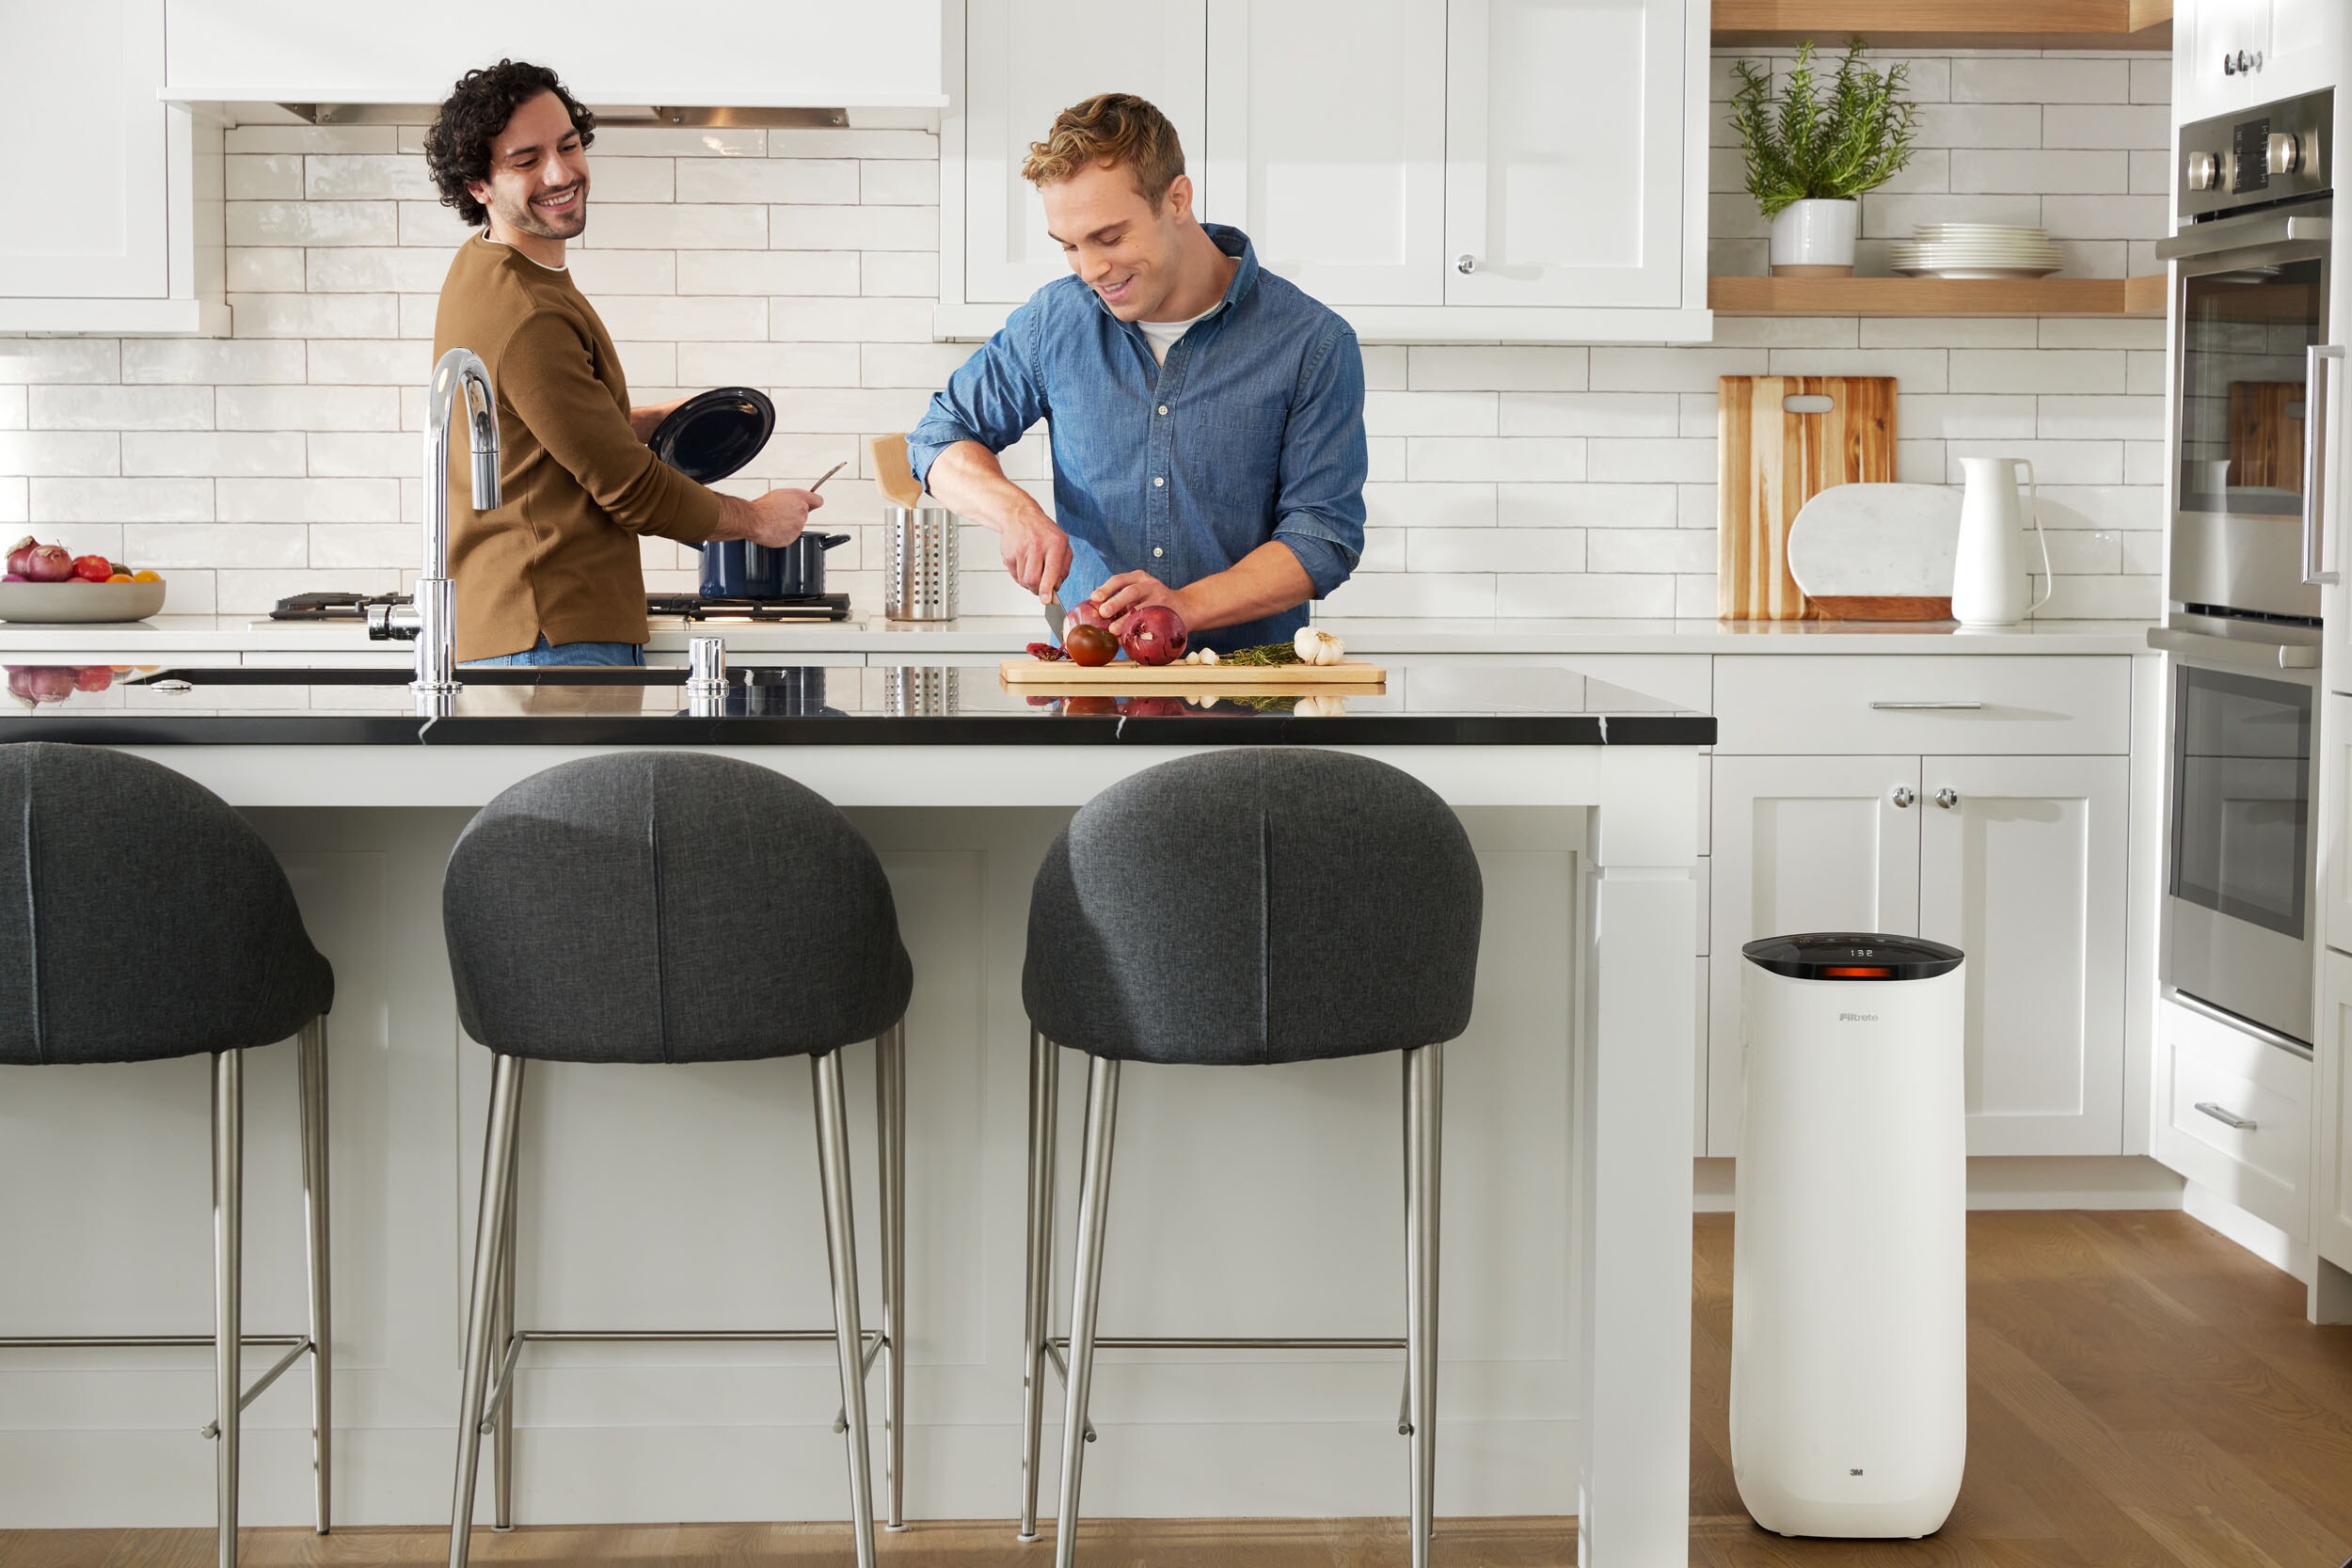 Air purifier positioned by two men preparing a meal in the kitchen.